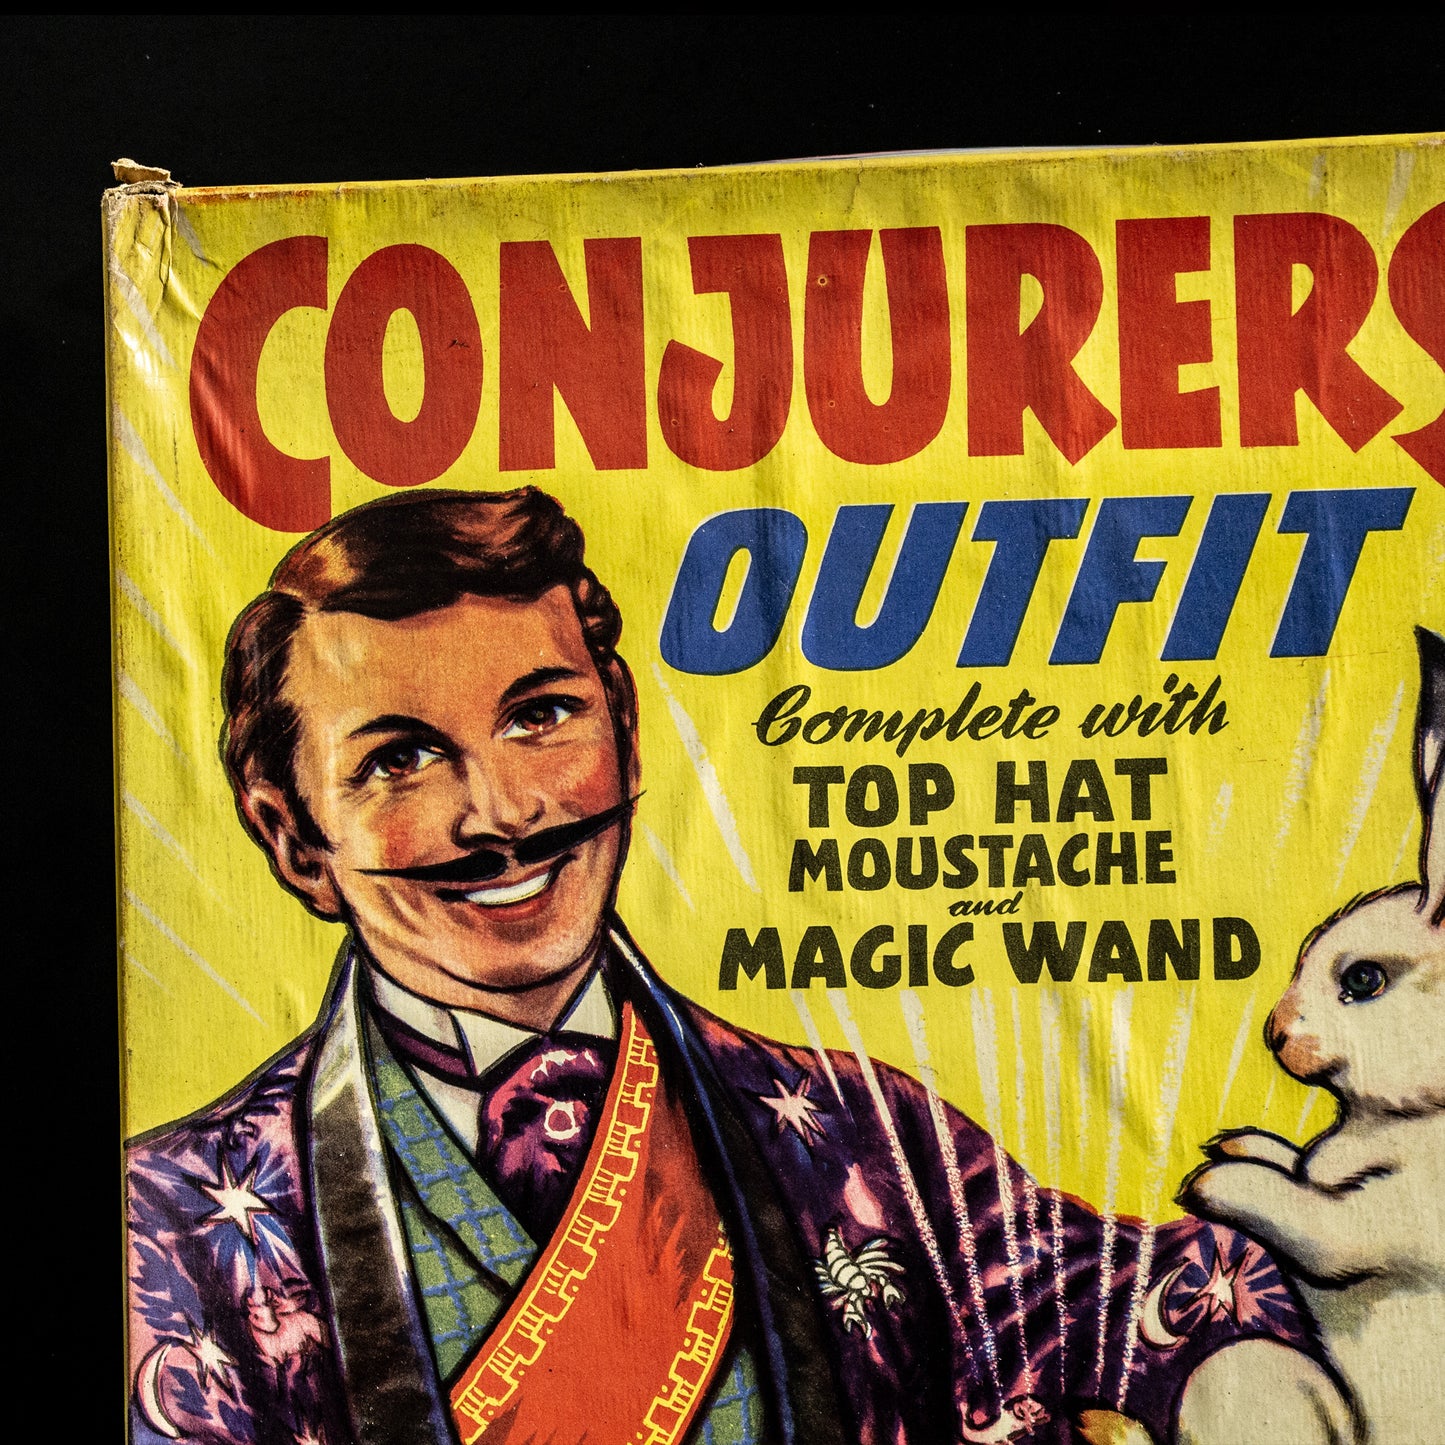 Vintage 1950s Conjurers Outfit Magic Kit